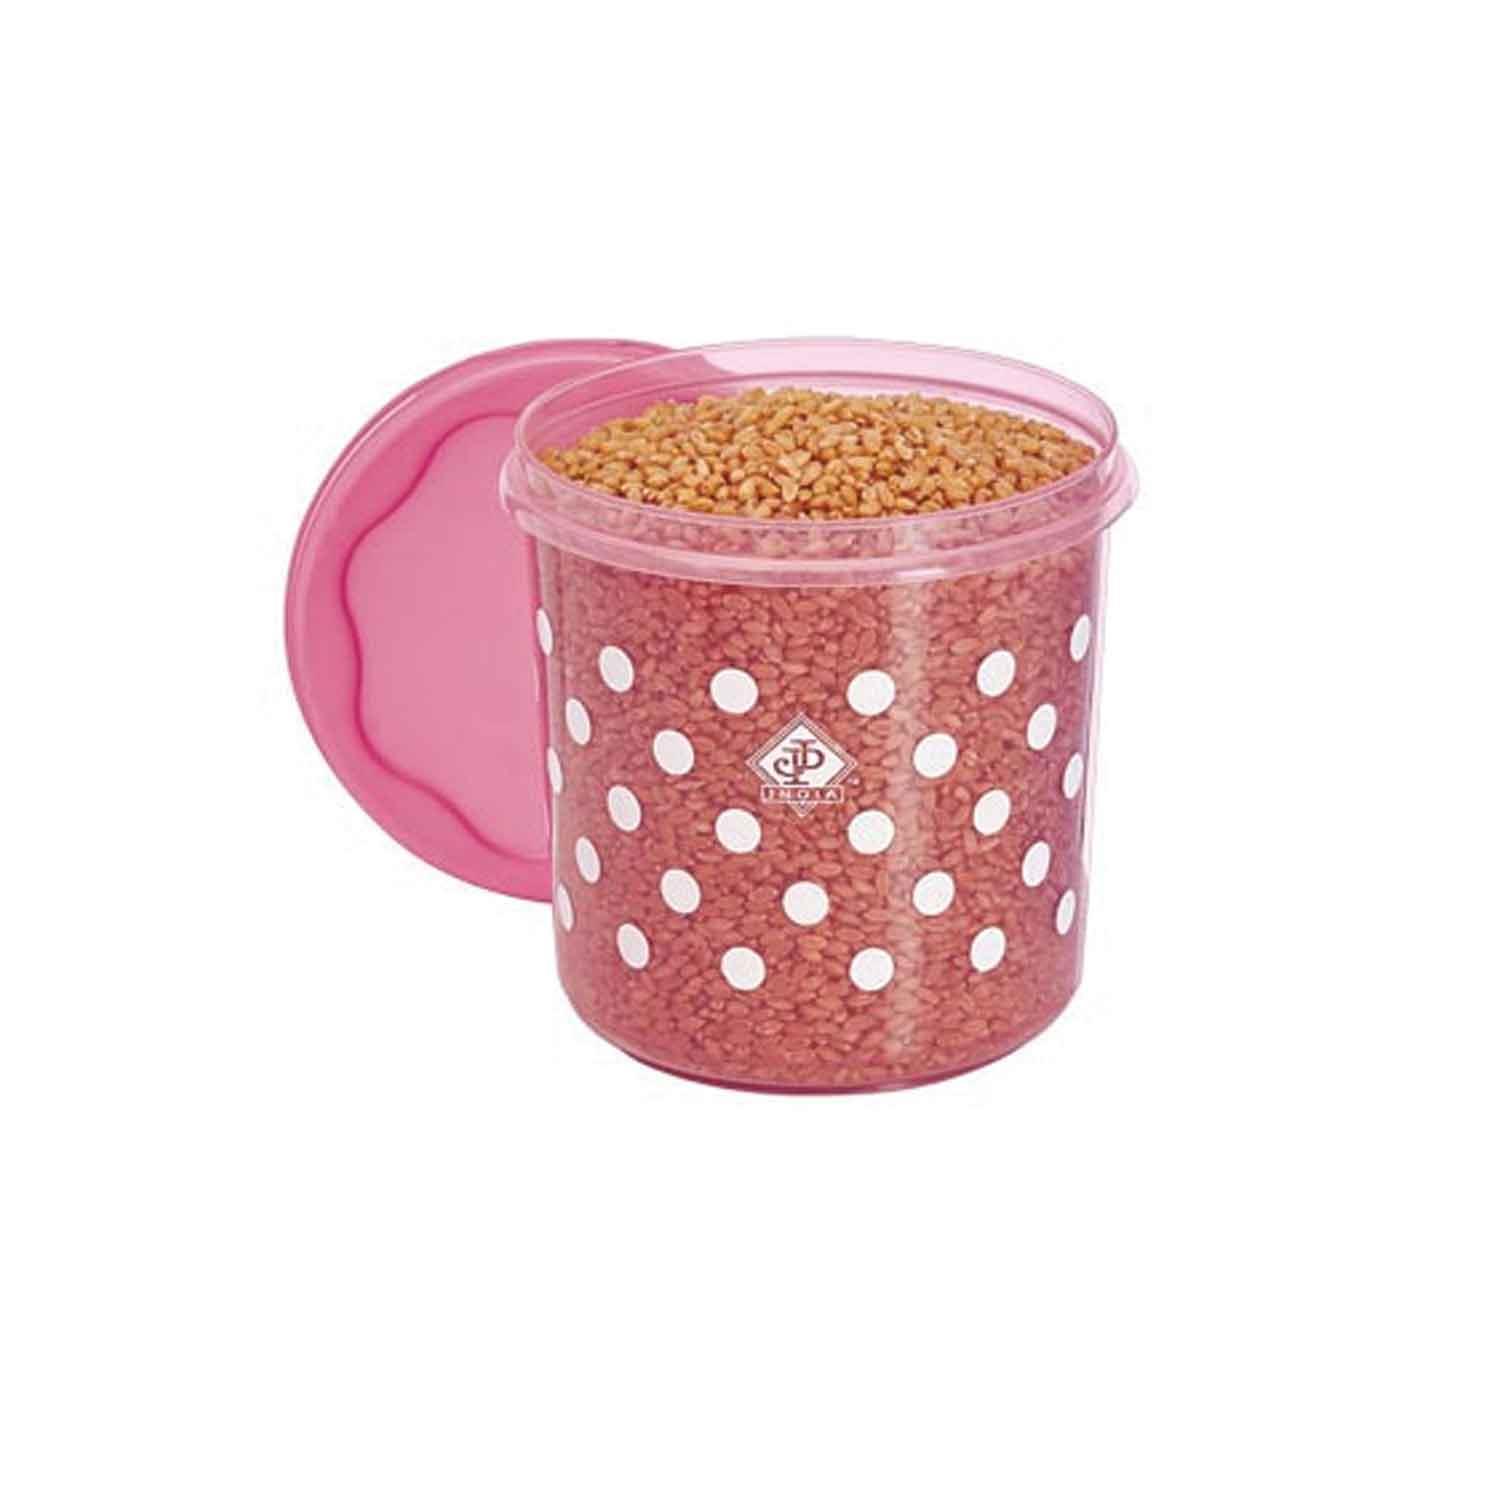 BHAWANI DOTTY CONTAINER 500 (PINK) 1PC